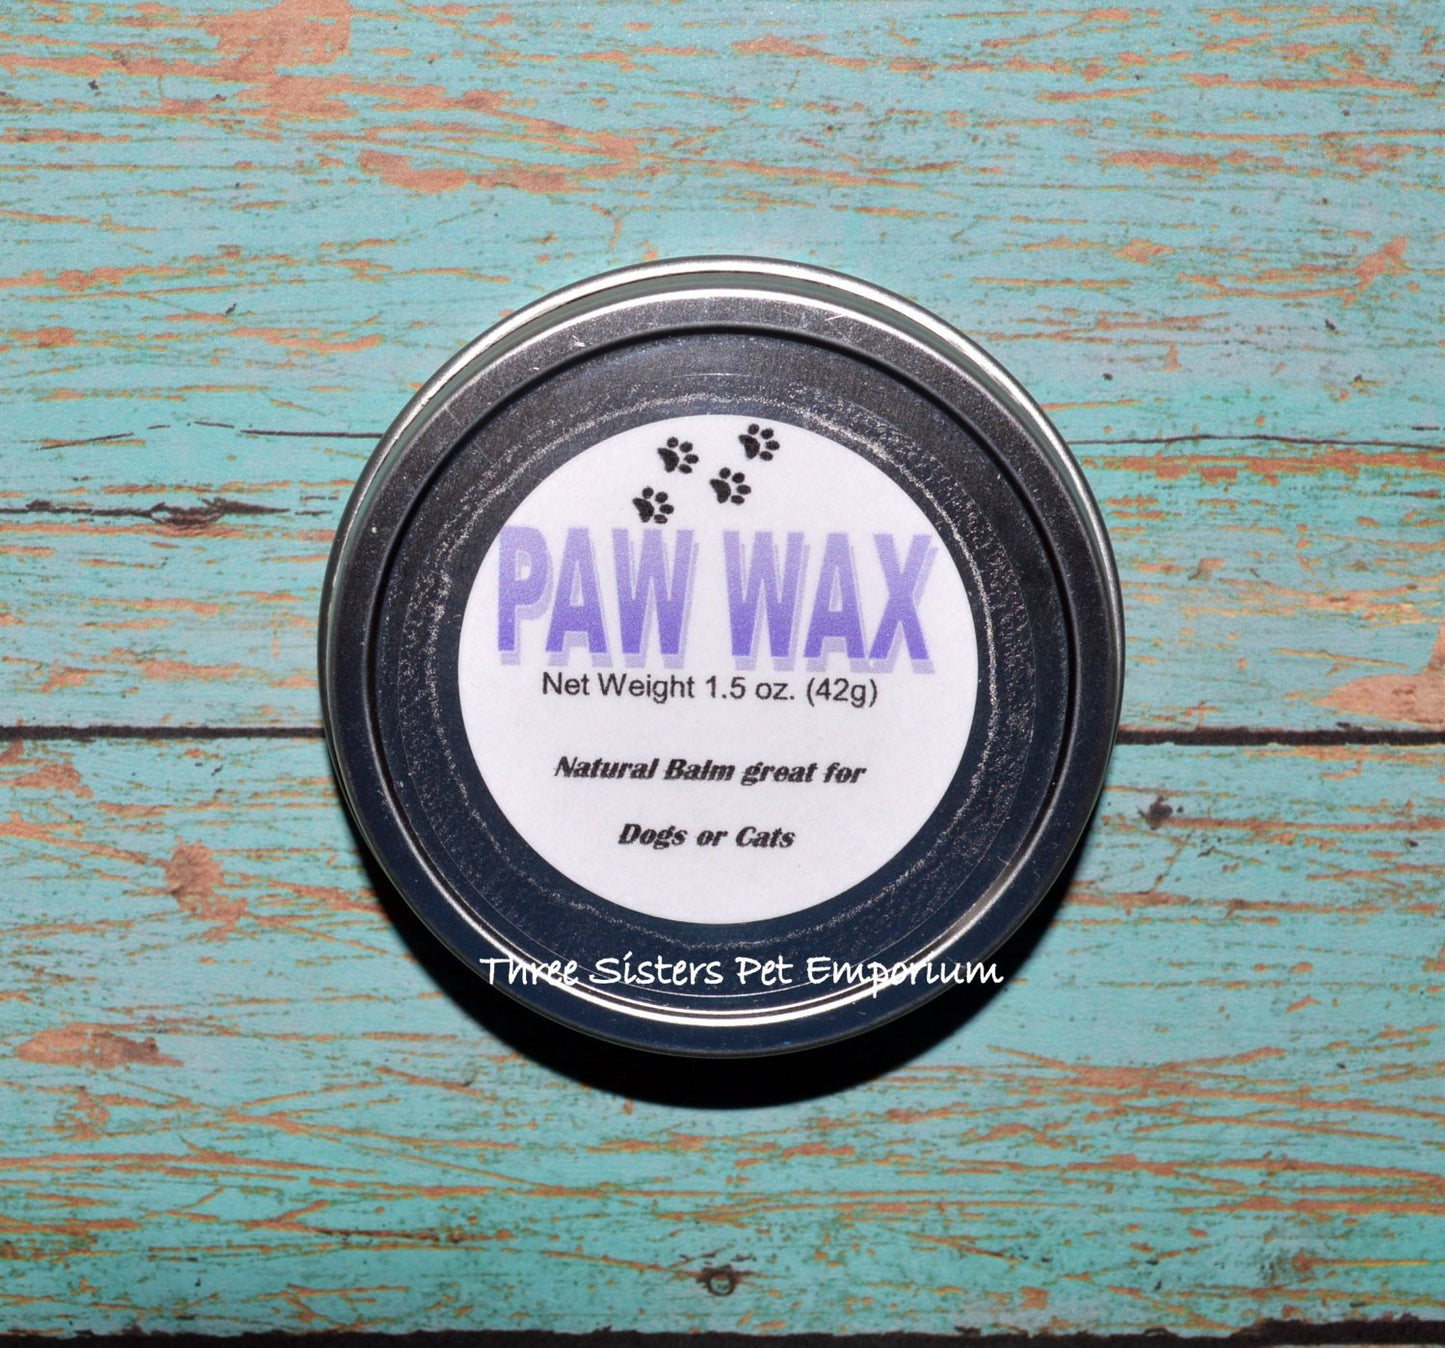 Paw Wax- For Dogs and Cats- Homemade Natural Balm - Feet and Nose - Mans best friend